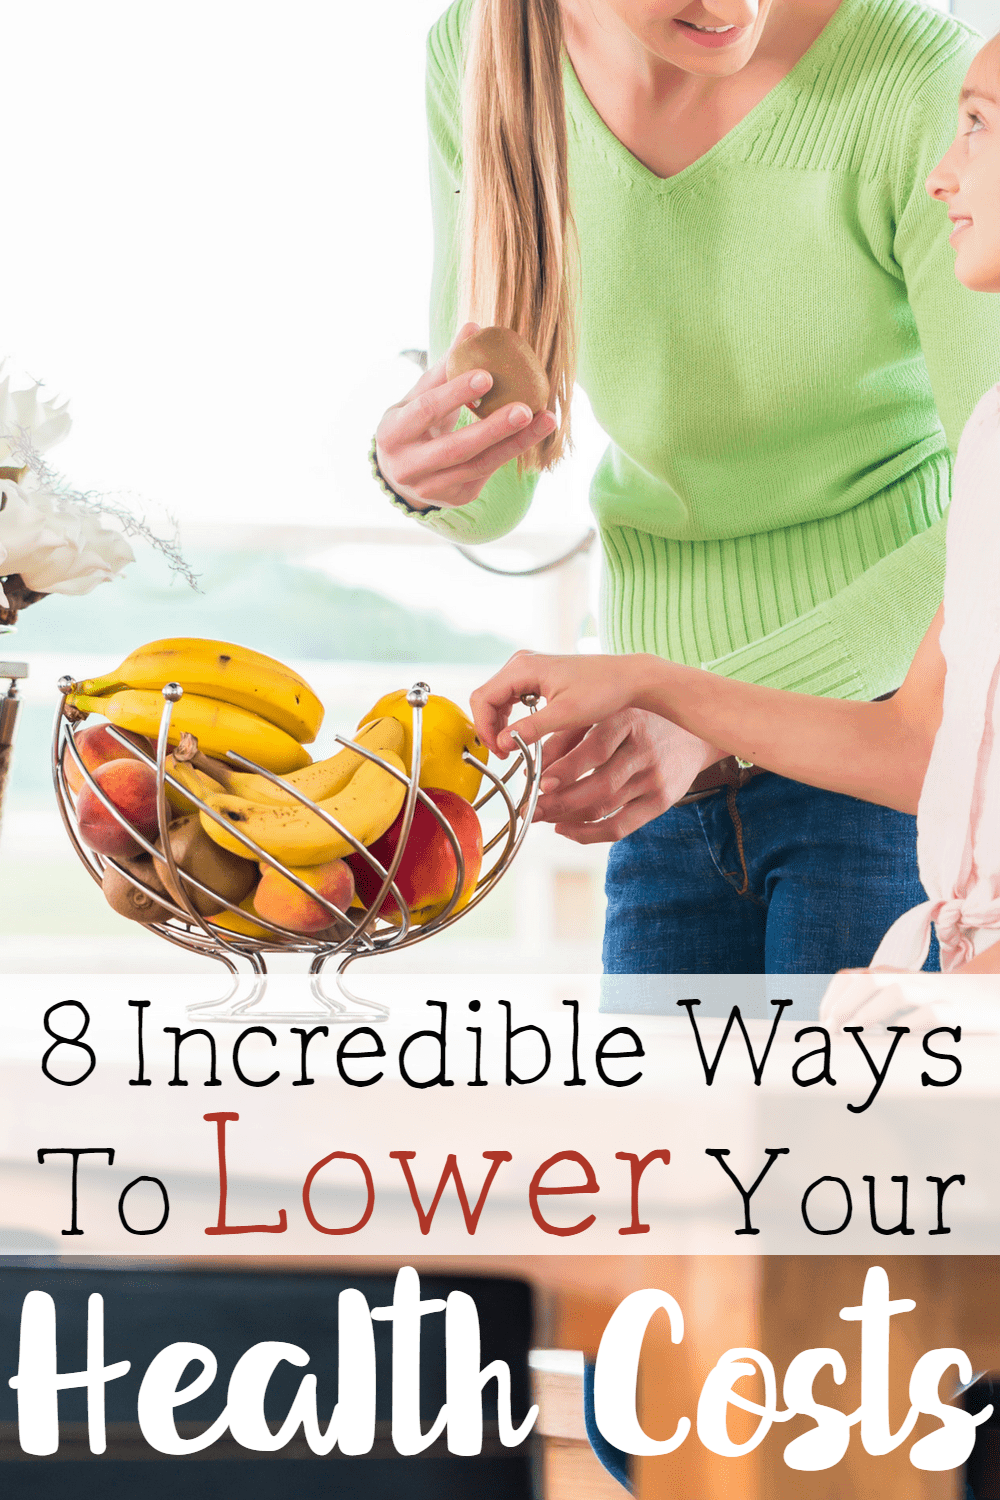 8 Incredible Ways to Lower Your Health Costs | Save on Family Health Expenses Year Round